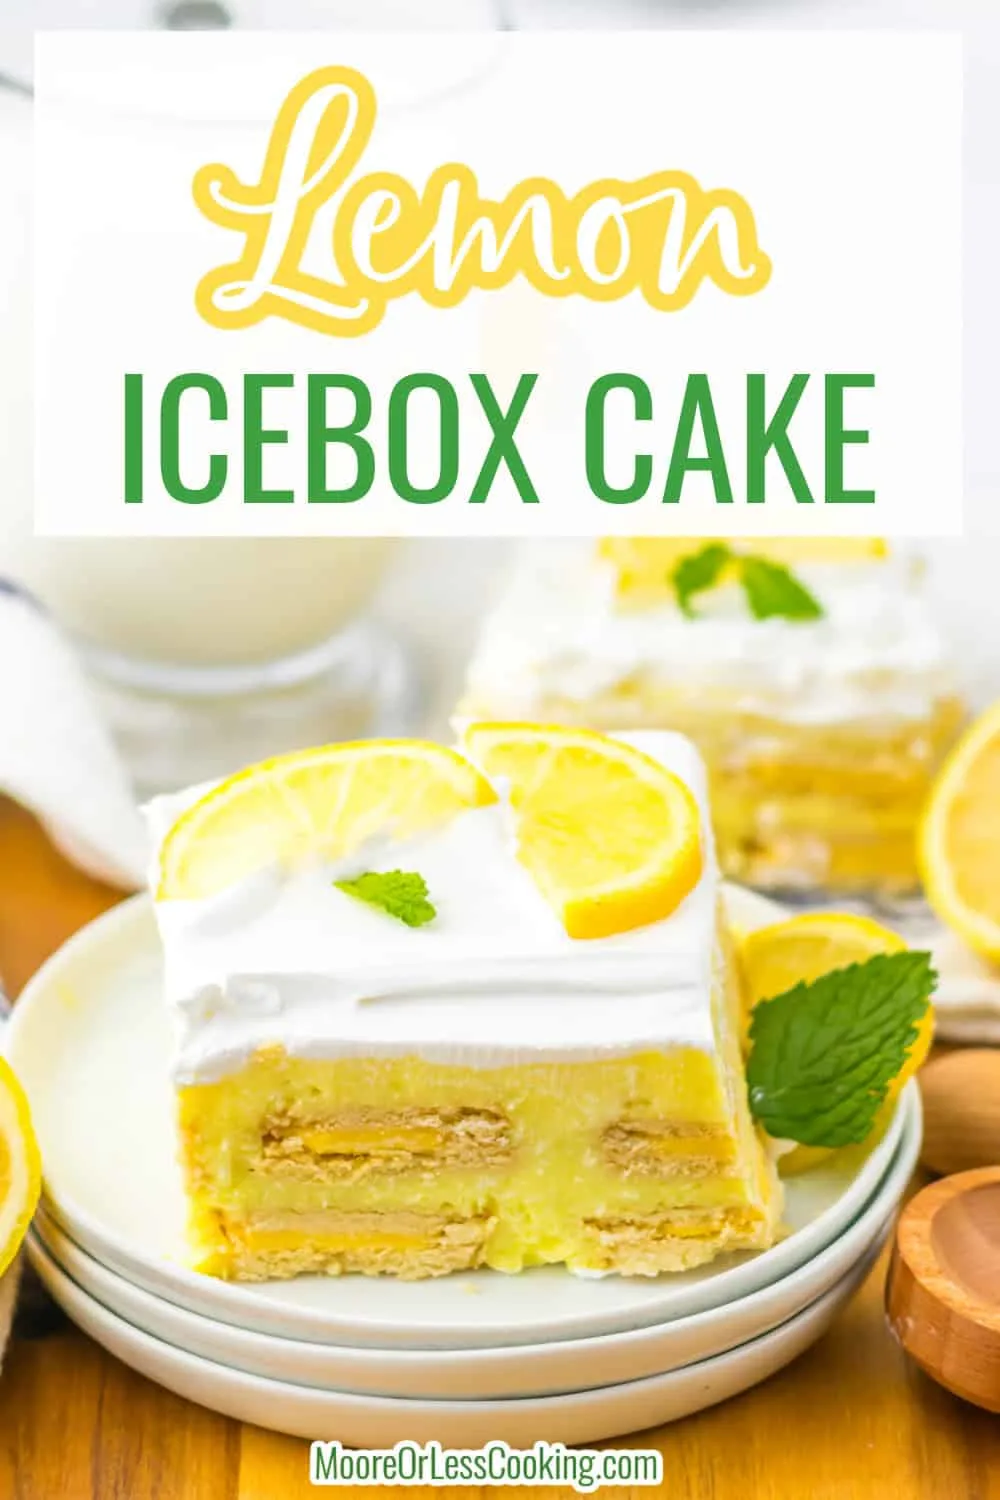 Lemon Icebox Cake is the perfect desert for the season! It is filled with a luscious and bright lemon cream cheese filling sandwiched between lemon cream filled cookies and topped with whipped cream. This is a no bake dessert and perfect for warmer weather. via @Mooreorlesscook